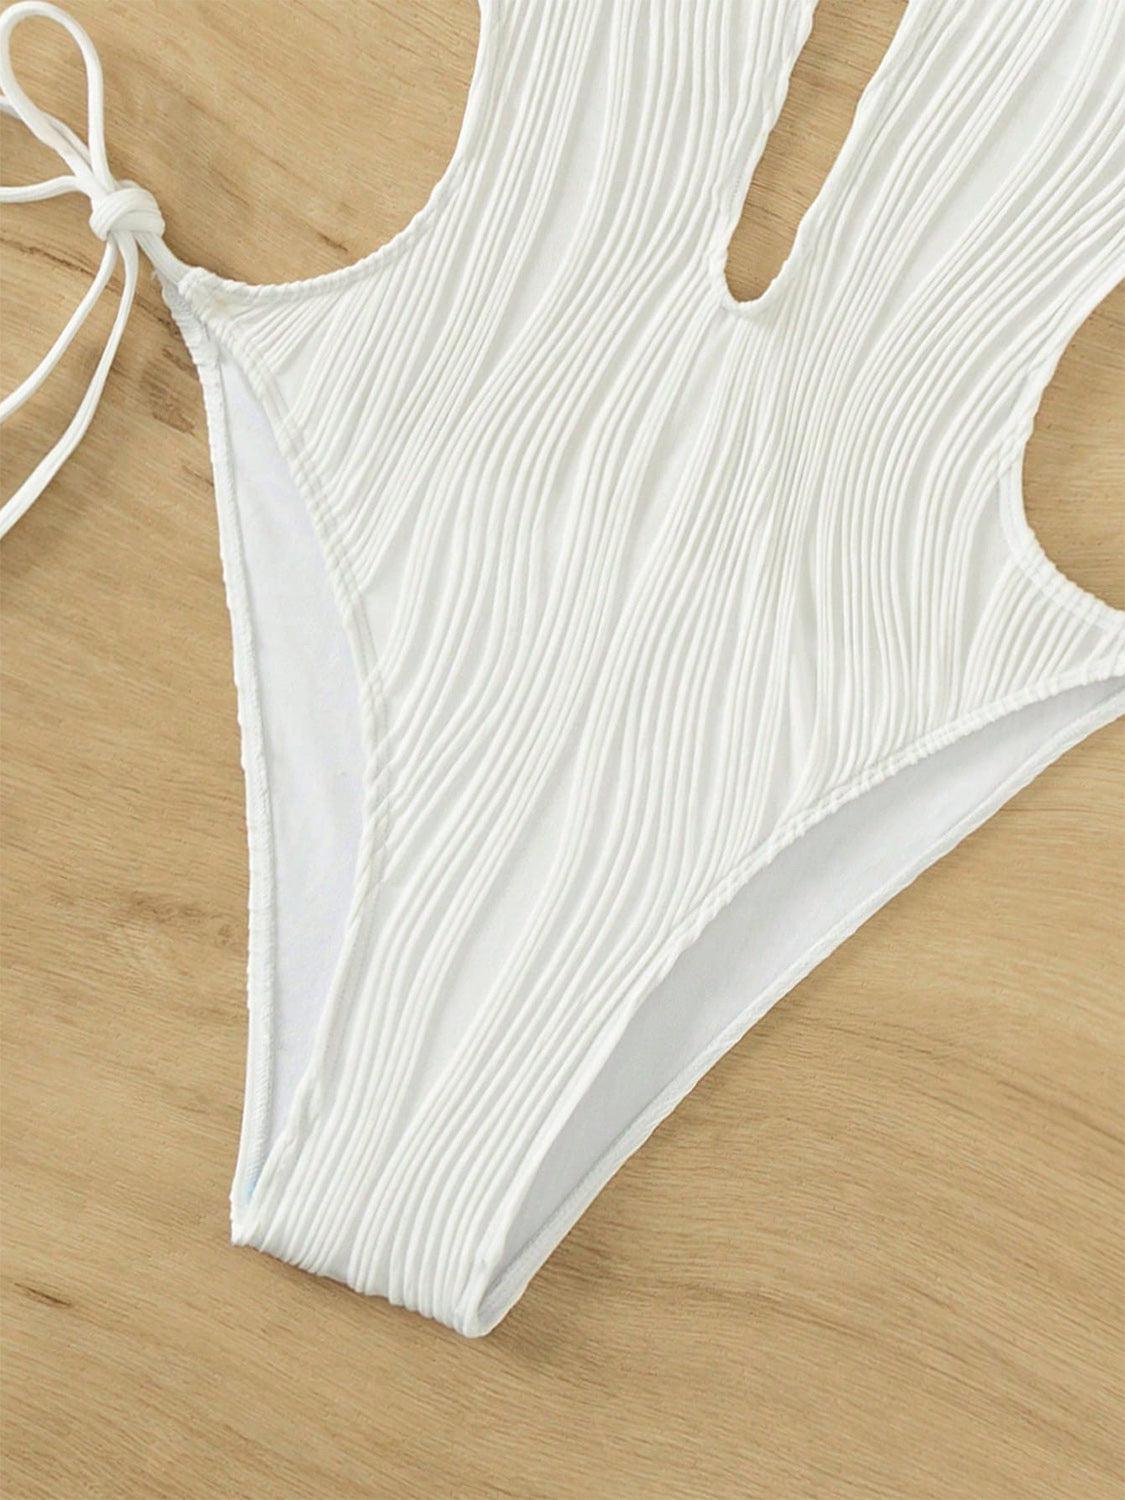 a white bikini top with a tie on a wooden surface